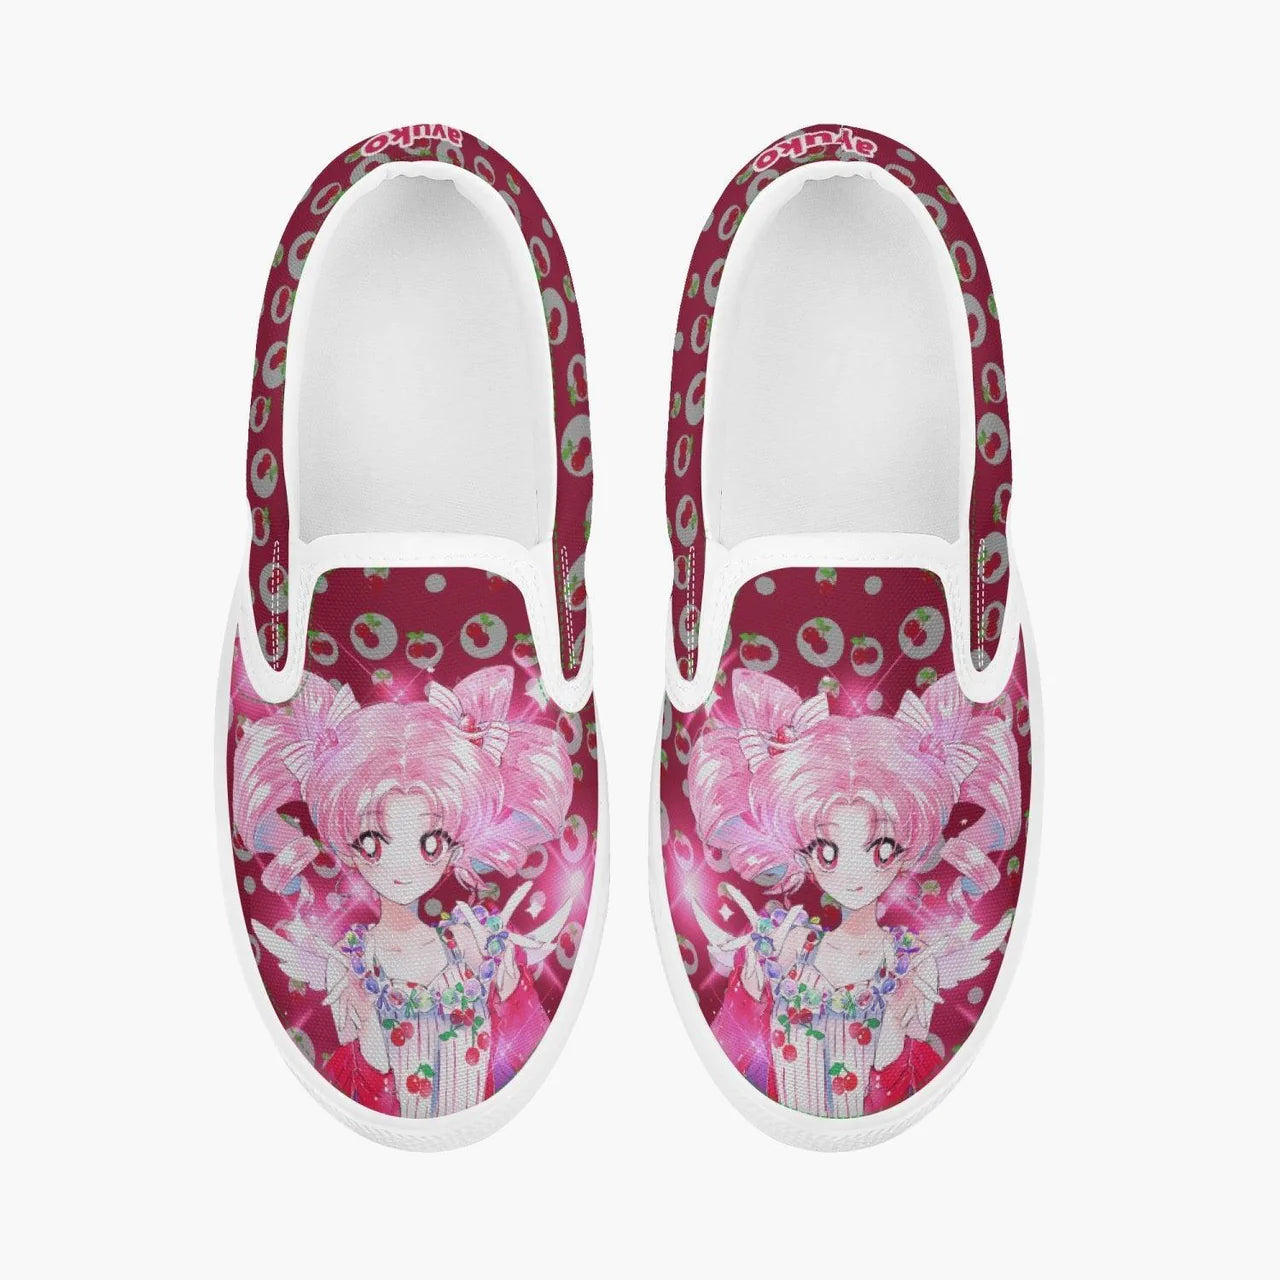 Anime Slip-Ons: Easy and Convenient Footwear for Daily Errands